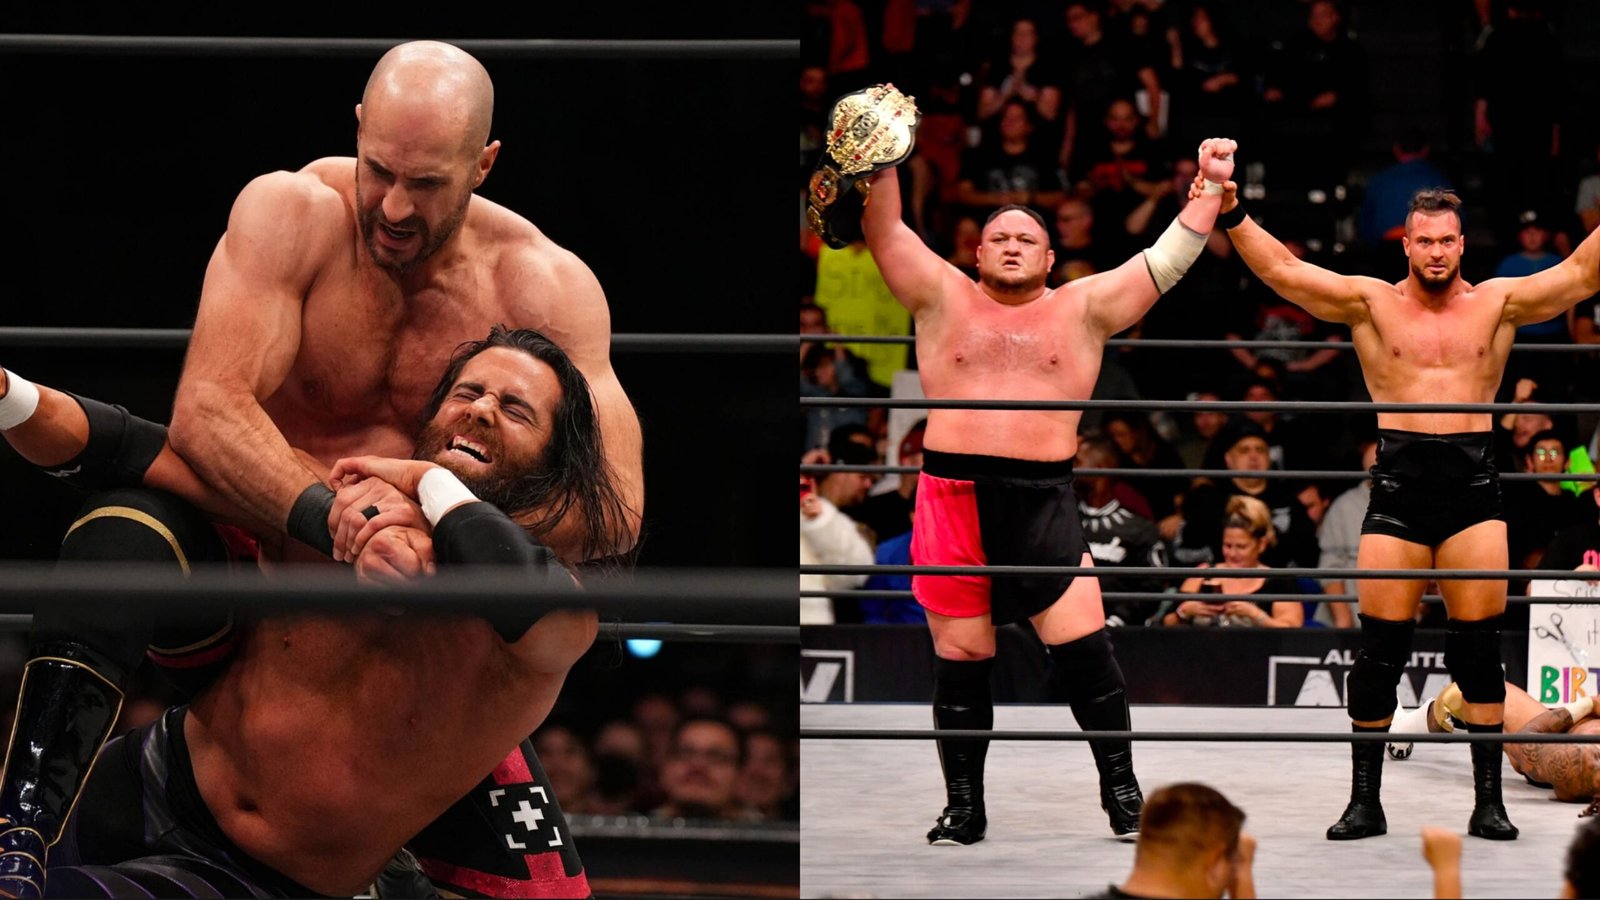 AEW Revolution 2023 Live Streaming When And Where To Watch The PPV In